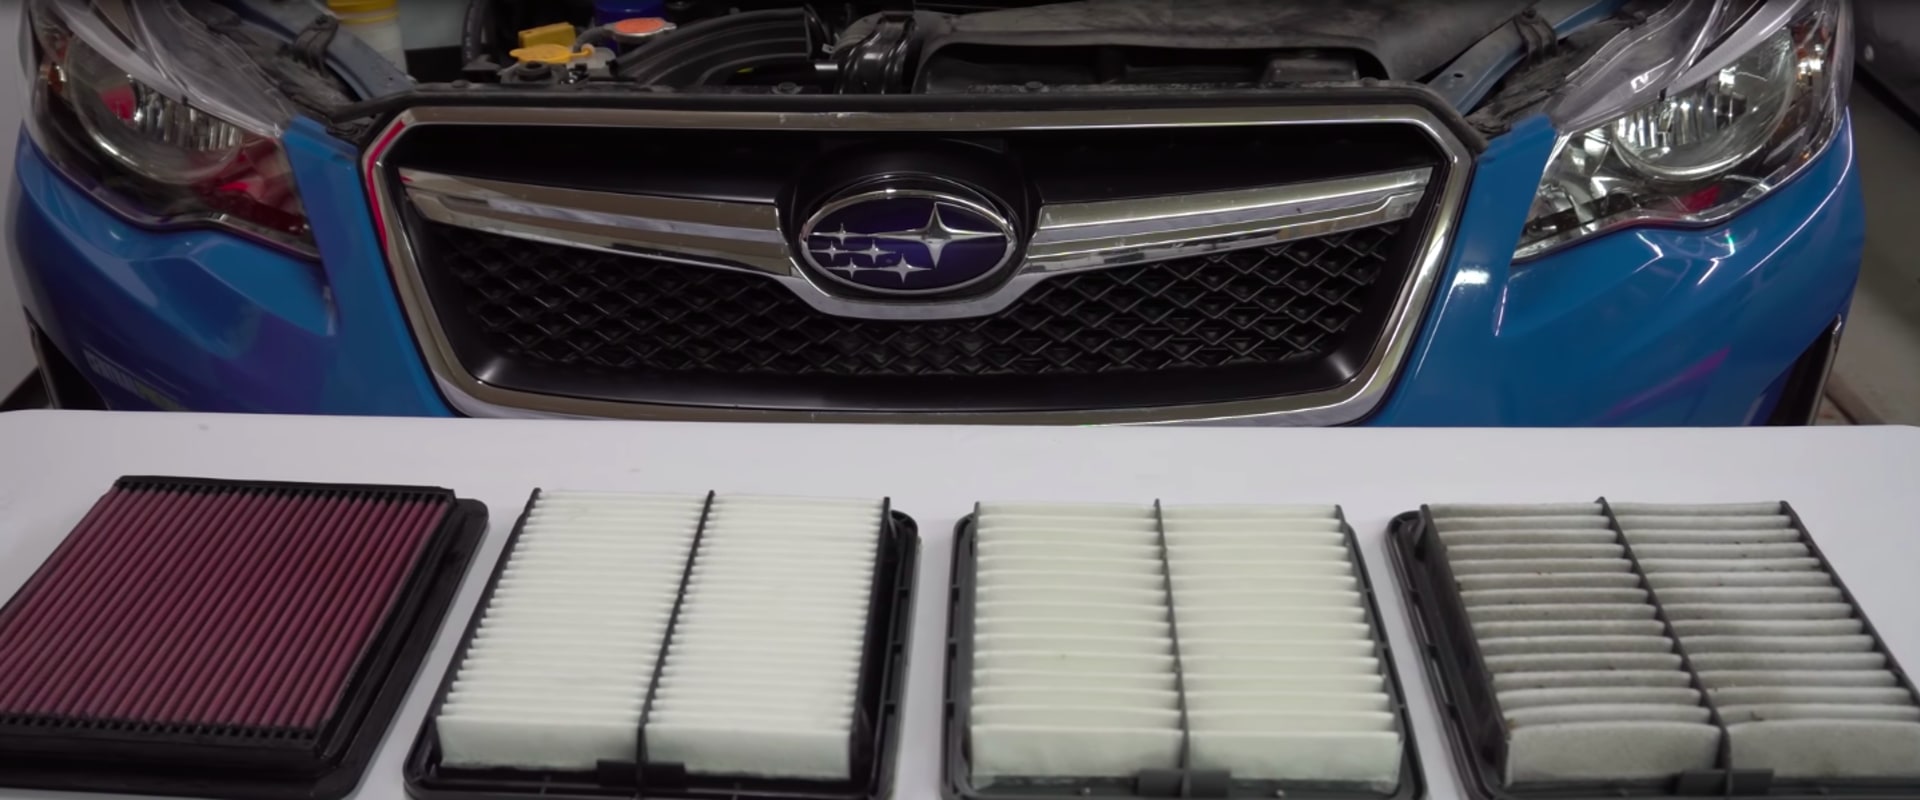 Do High-Performance Air Filters Increase Power?